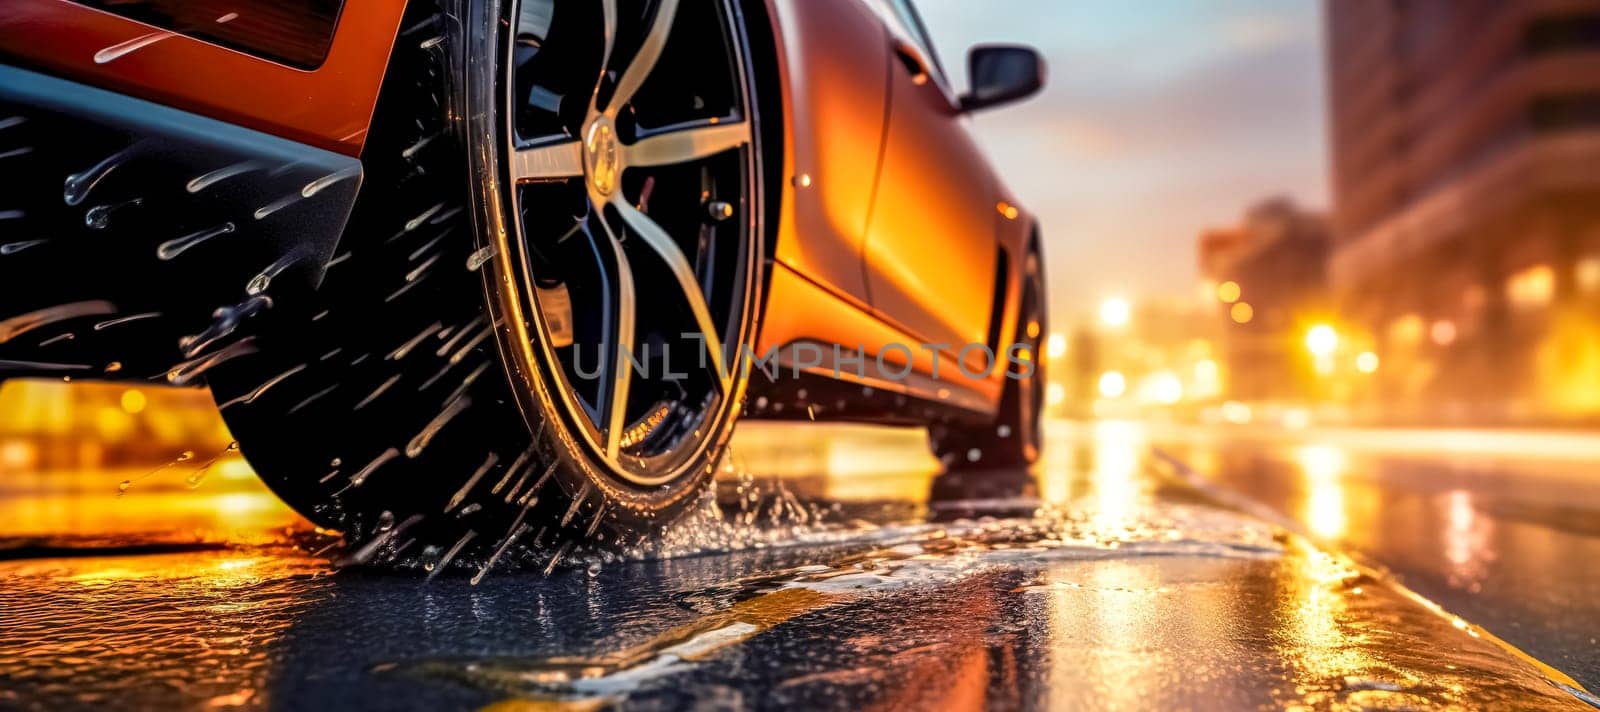 sleek car's tire on a wet road, with water splashing around as it moves, reflecting the city lights in the evening by Edophoto